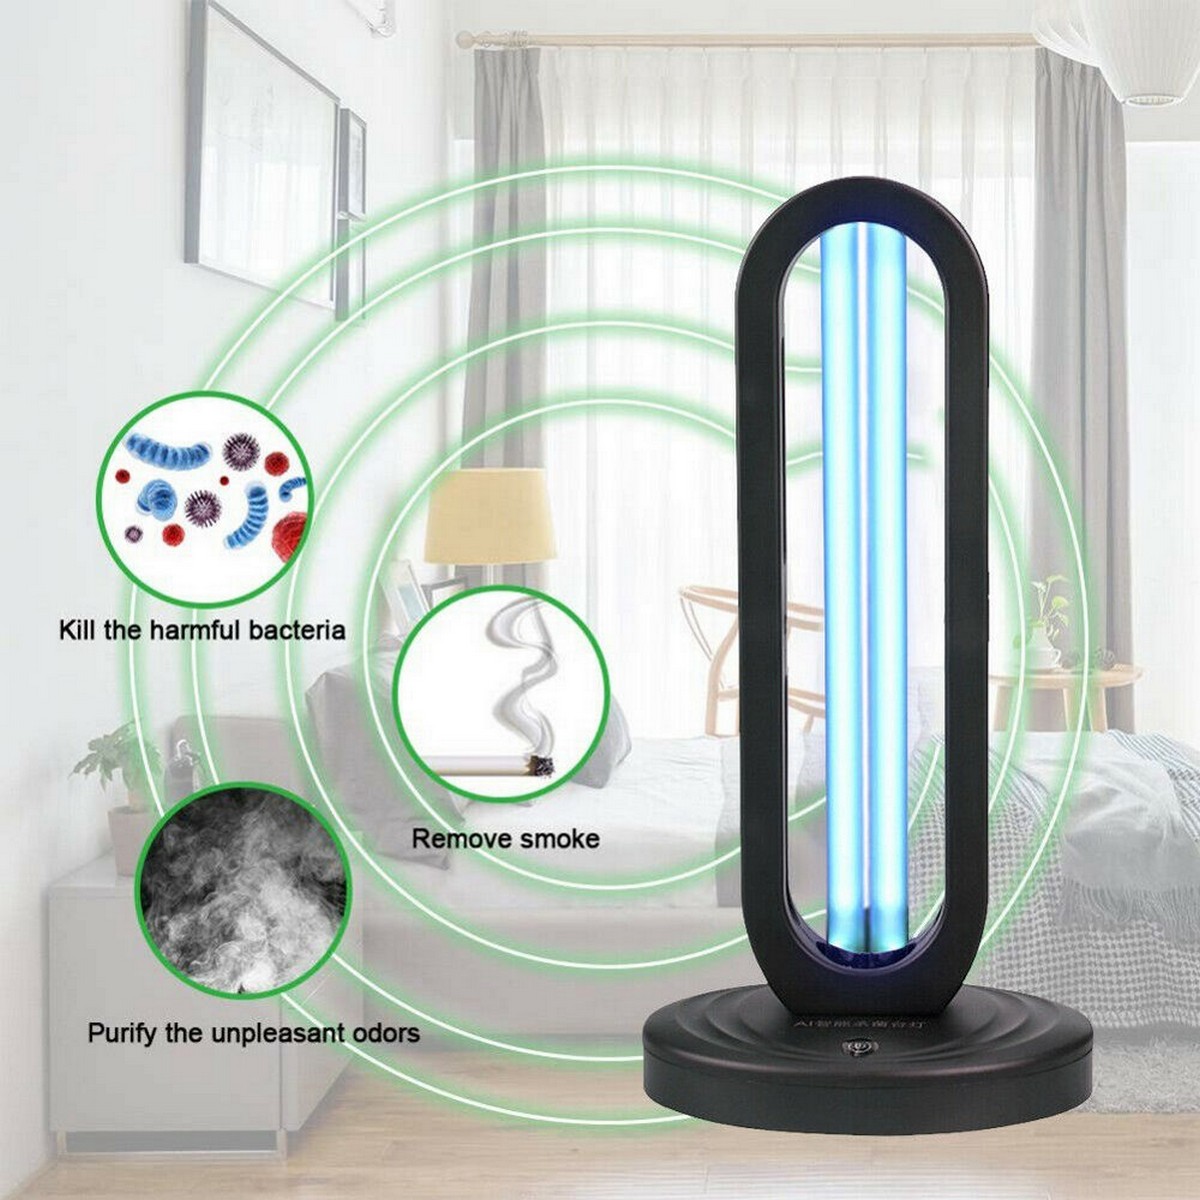 99.9% Antibacterial Rate Killing Mites Flu Bacterial Viruses for Home Office,38W UV Disinfection Lamp 220V 38W/60W UV-C Air Steriliser UV And Ozone Efficient Sterilization with 3 Timer Setting